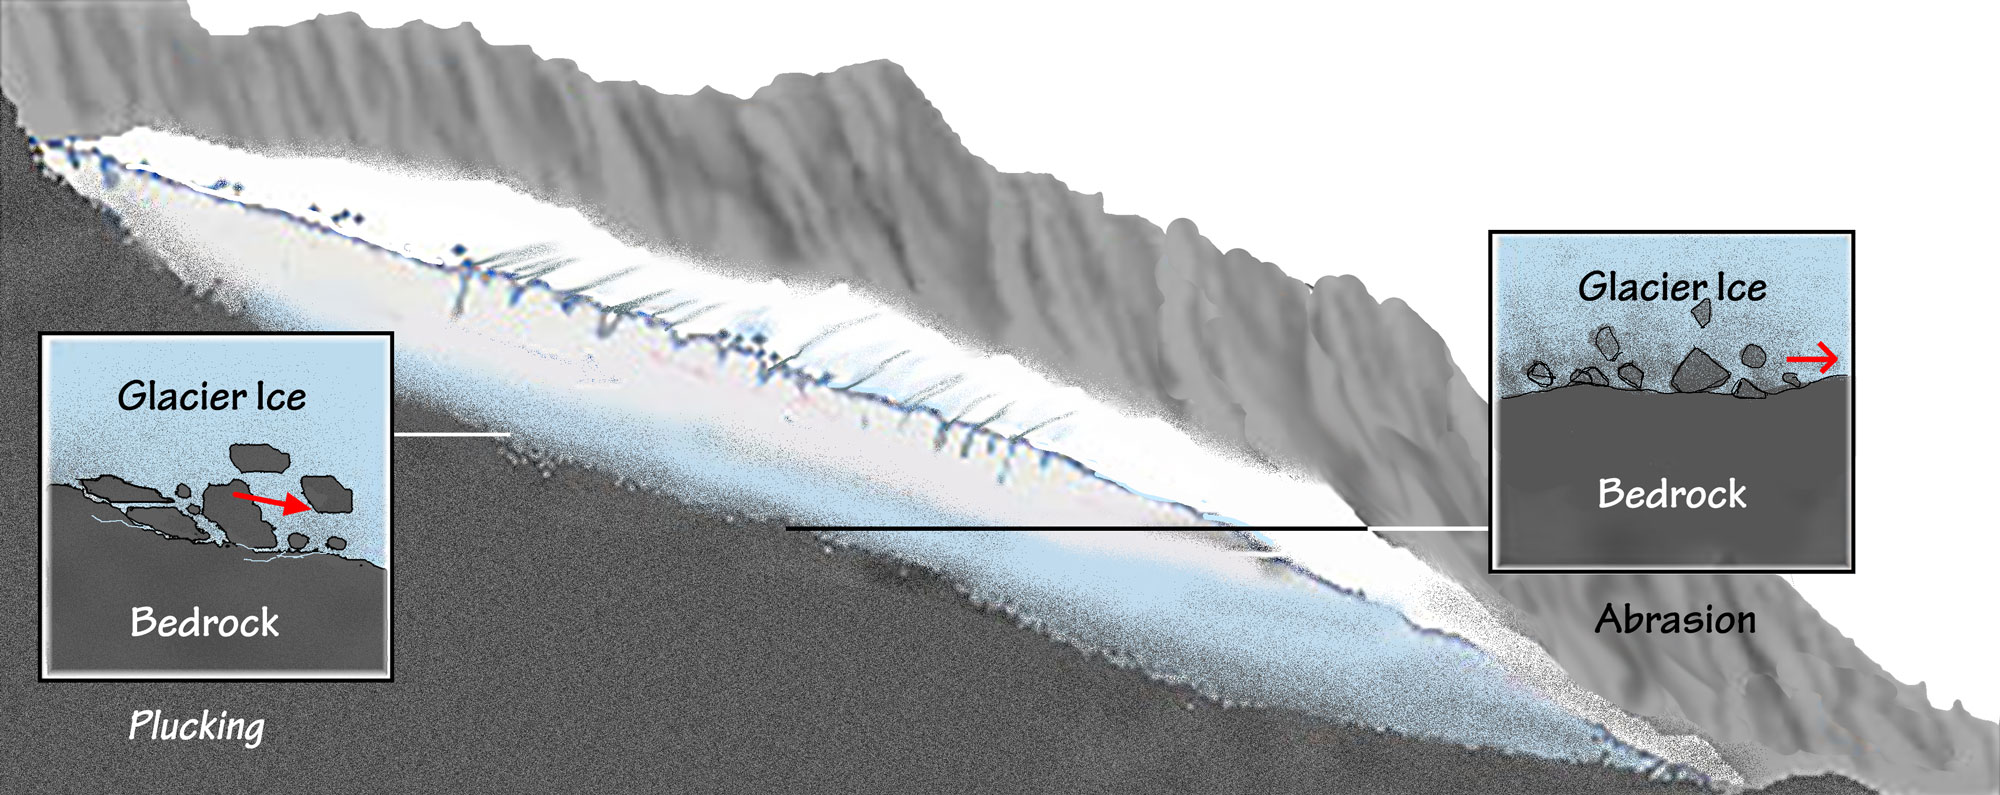 Diagram showing rock and sediment derived by plucking and abrasion. The diagram shows a gray slope with an oblong glacier on it. One inset shows plucking, where glacial ice picks up pieces of bedrock. The other shows abrasion, where the glacial ice wears down the bedrock.